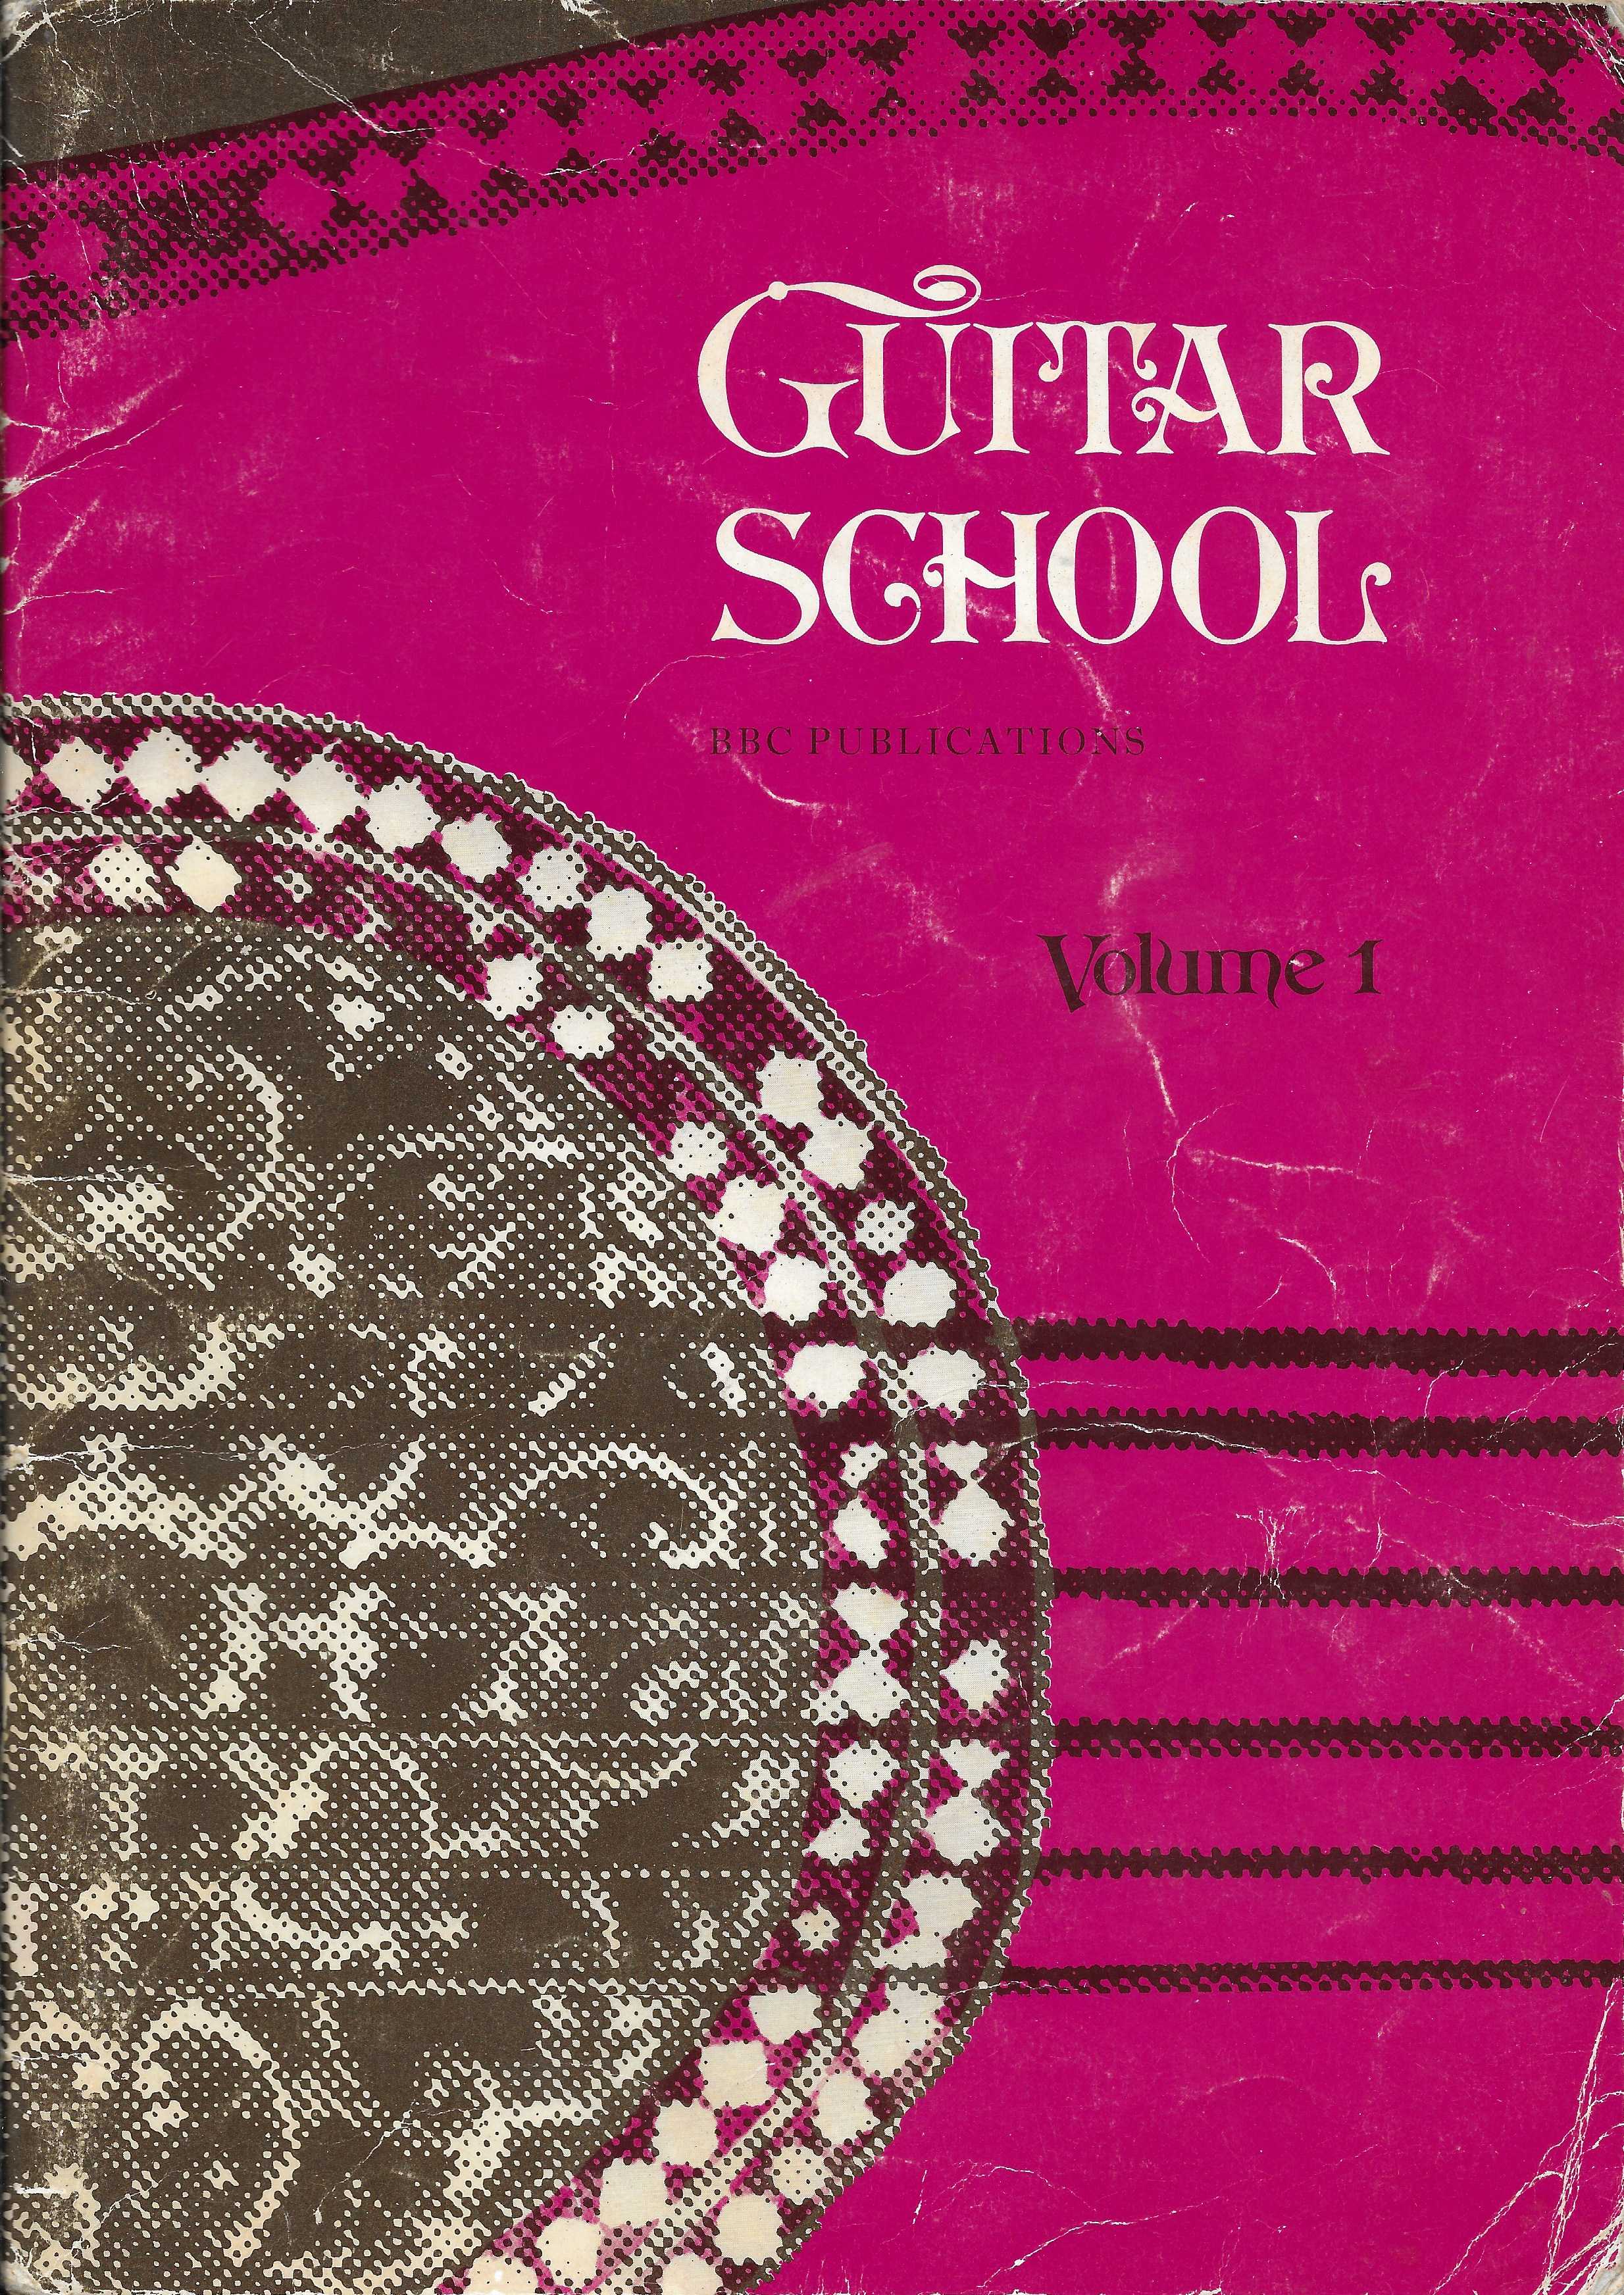 Picture of ISBN 563 13978 Guitar school - Volume 1 by artist Michael Jessett from the BBC books - Records and Tapes library